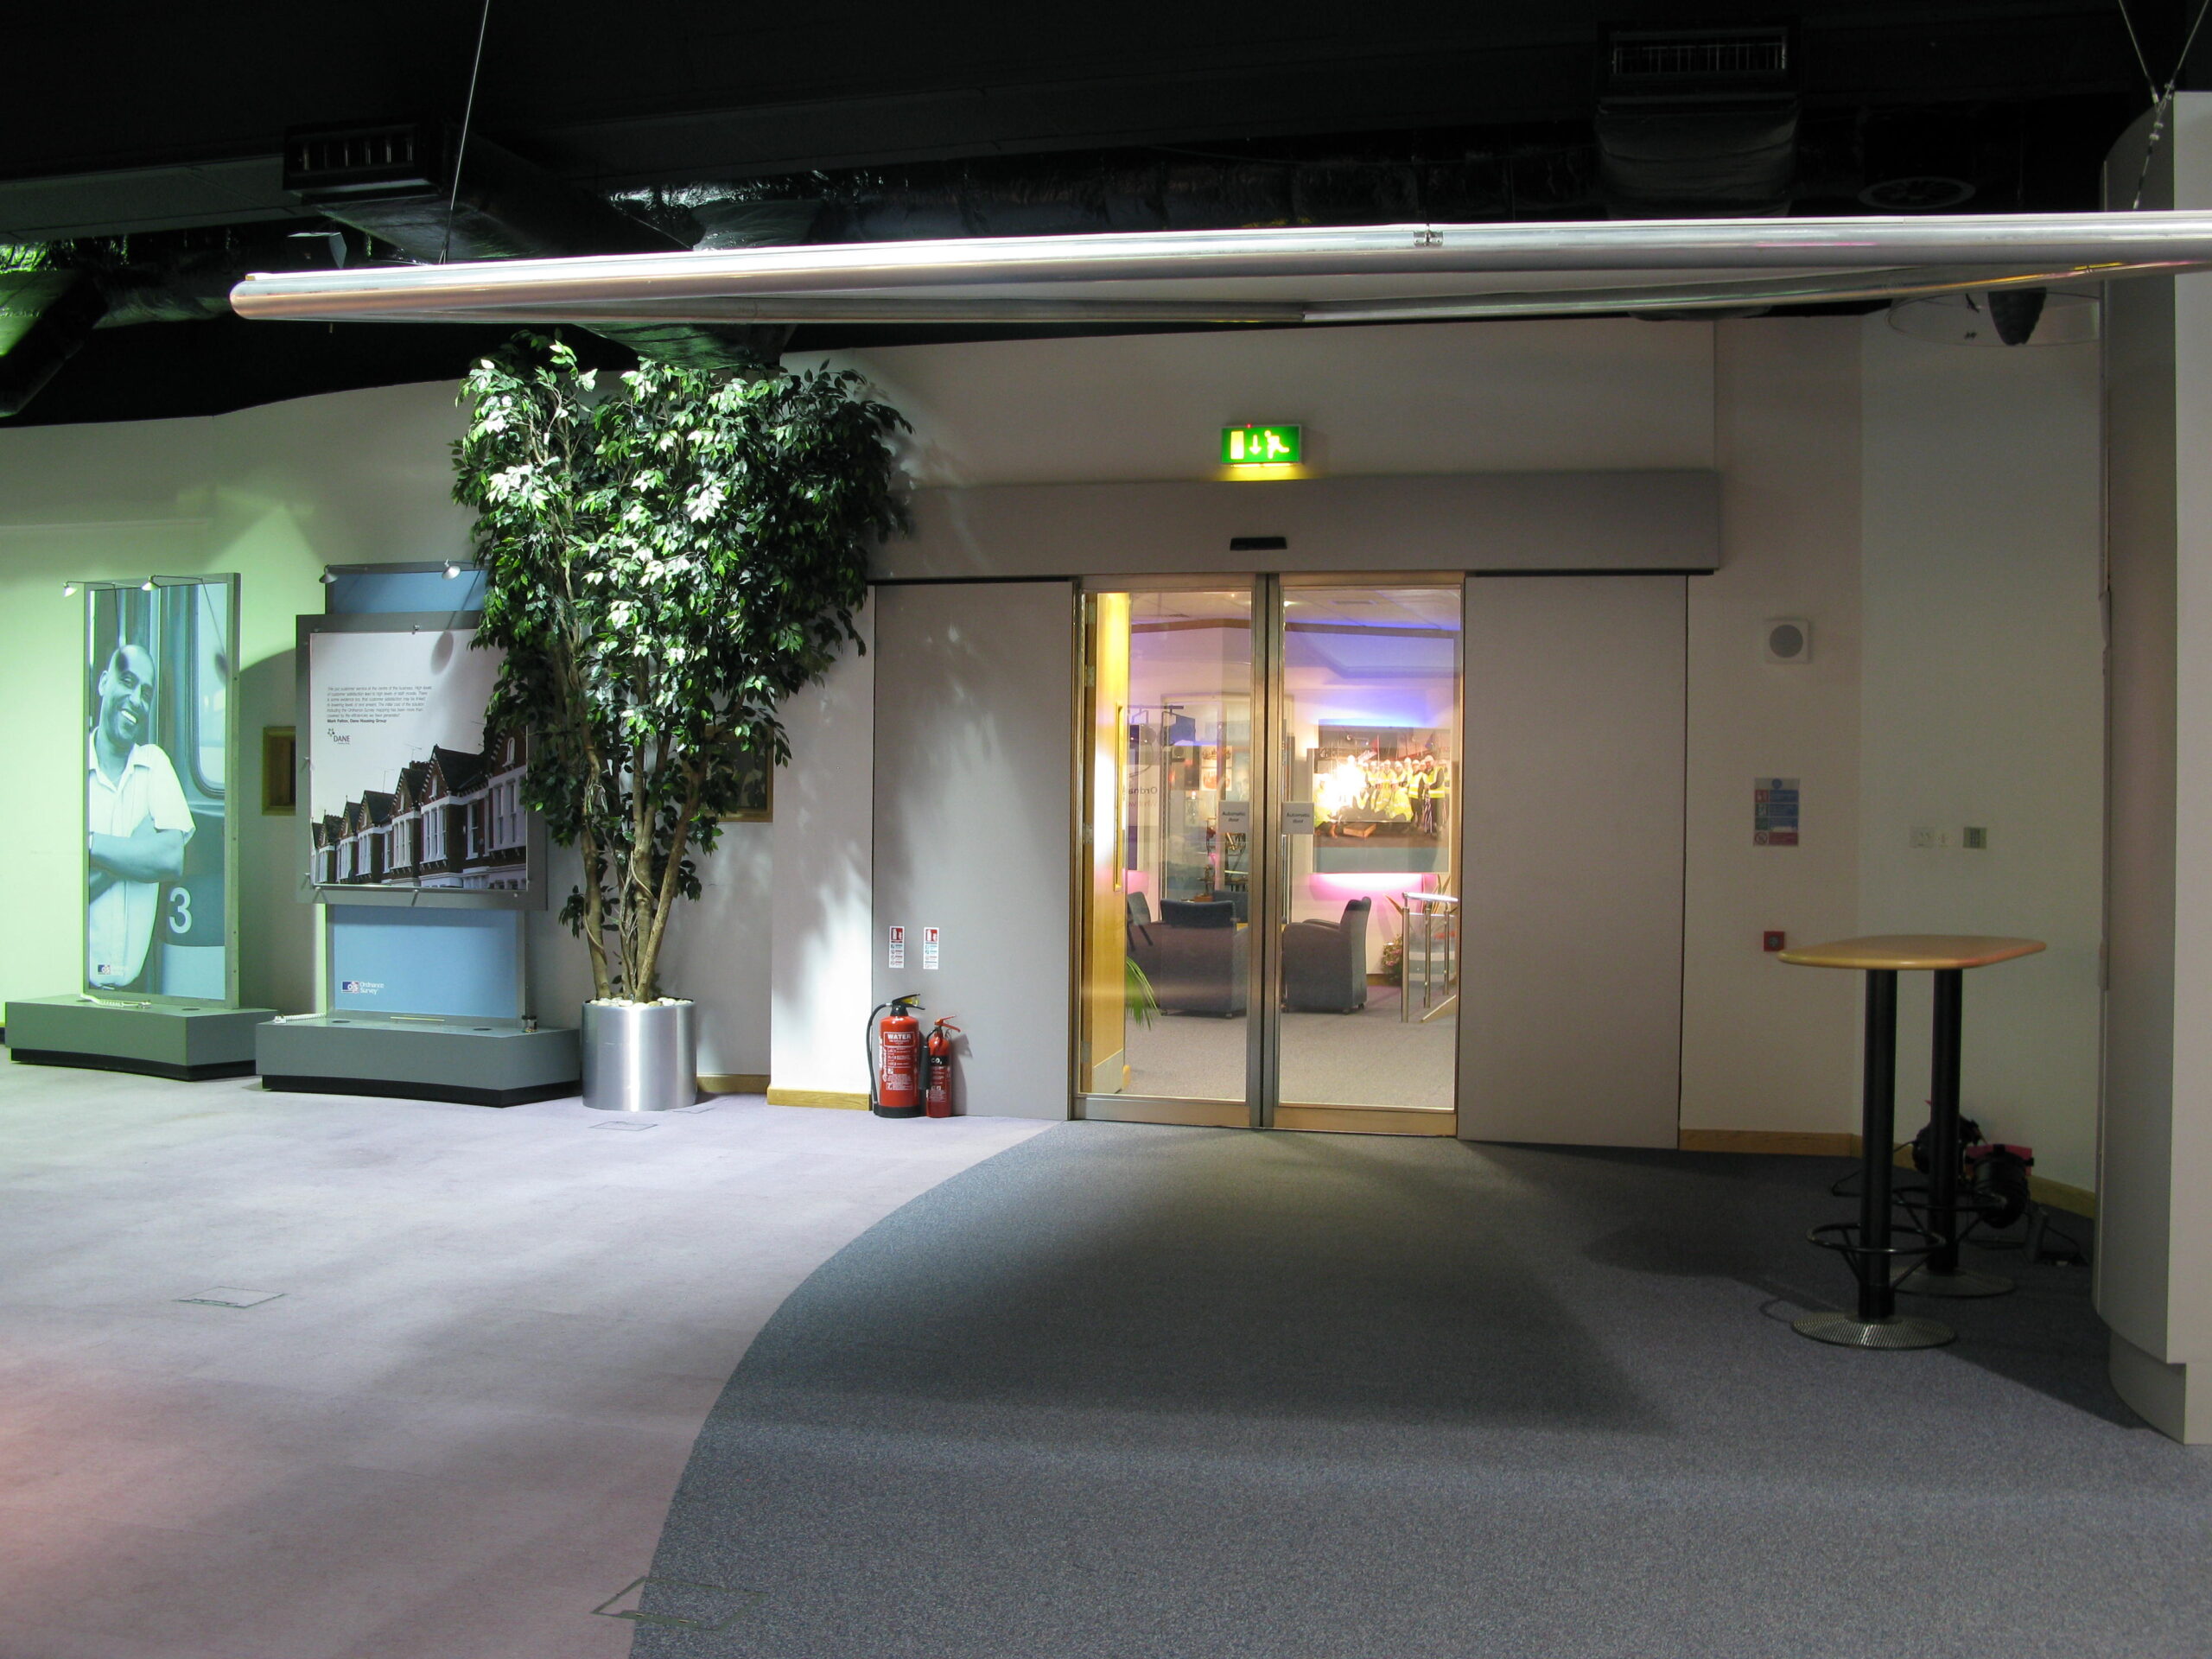 Business Centre main exhibition hall and entrance from Reception/waiting area